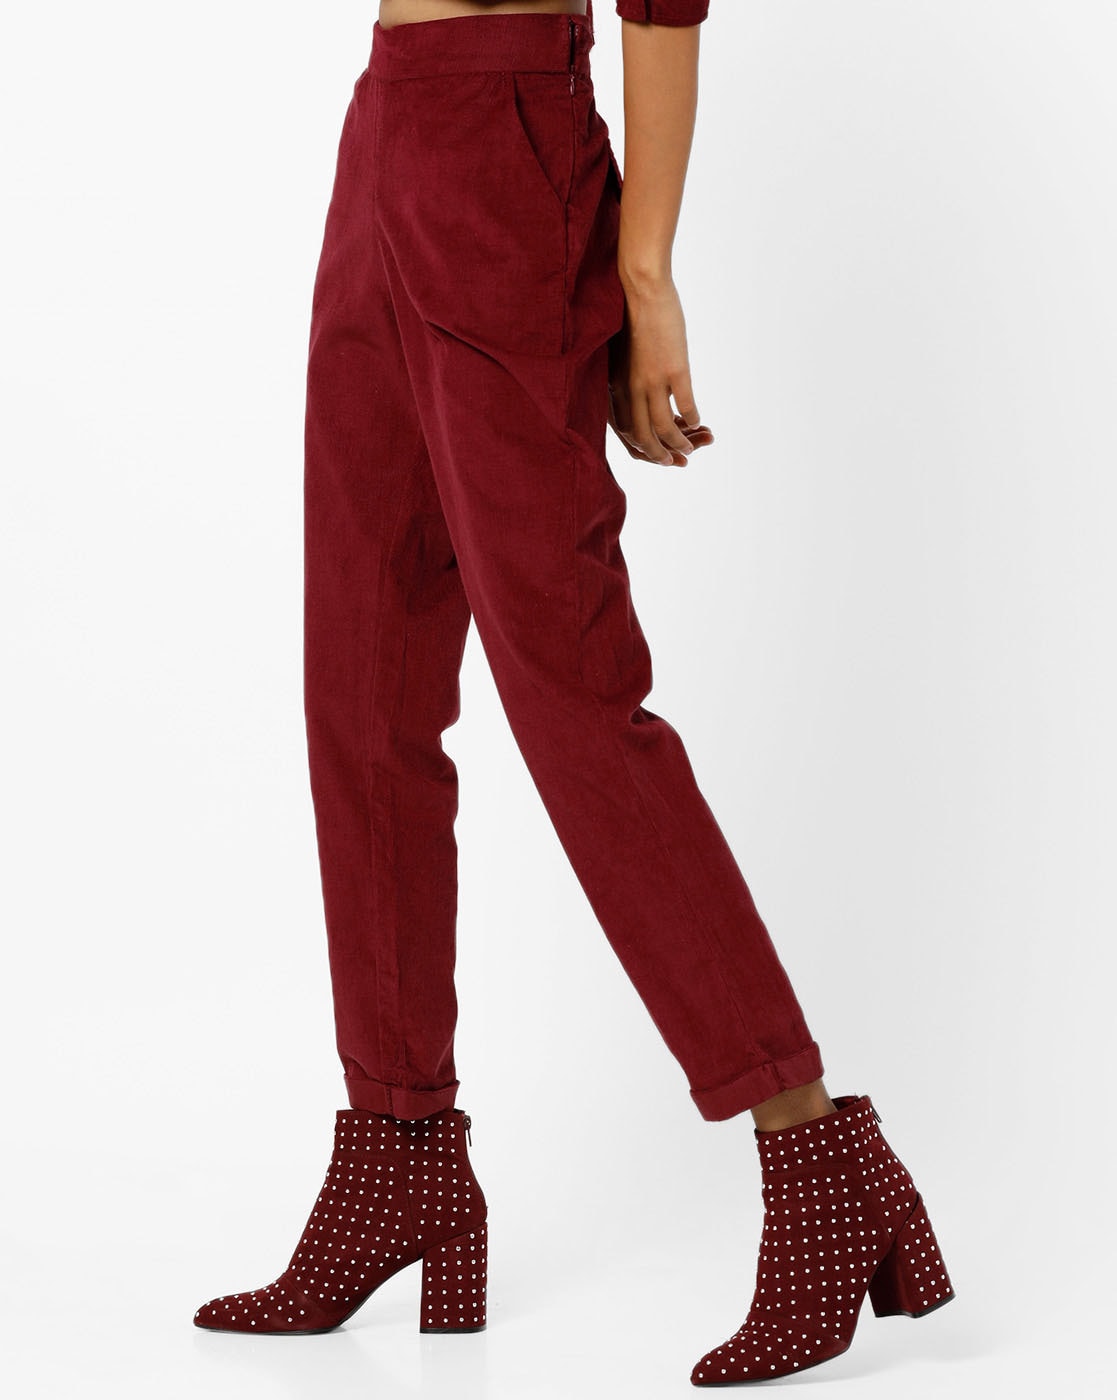 Corduroy Trousers for Women - Autumn Winter Wine Red Middle Aged Women  Corduroy Pants Elastic High Waist Casual Straight Pants Large Size Loose  Thick Mother Trousers,As Shown,XXL : Amazon.co.uk: Fashion